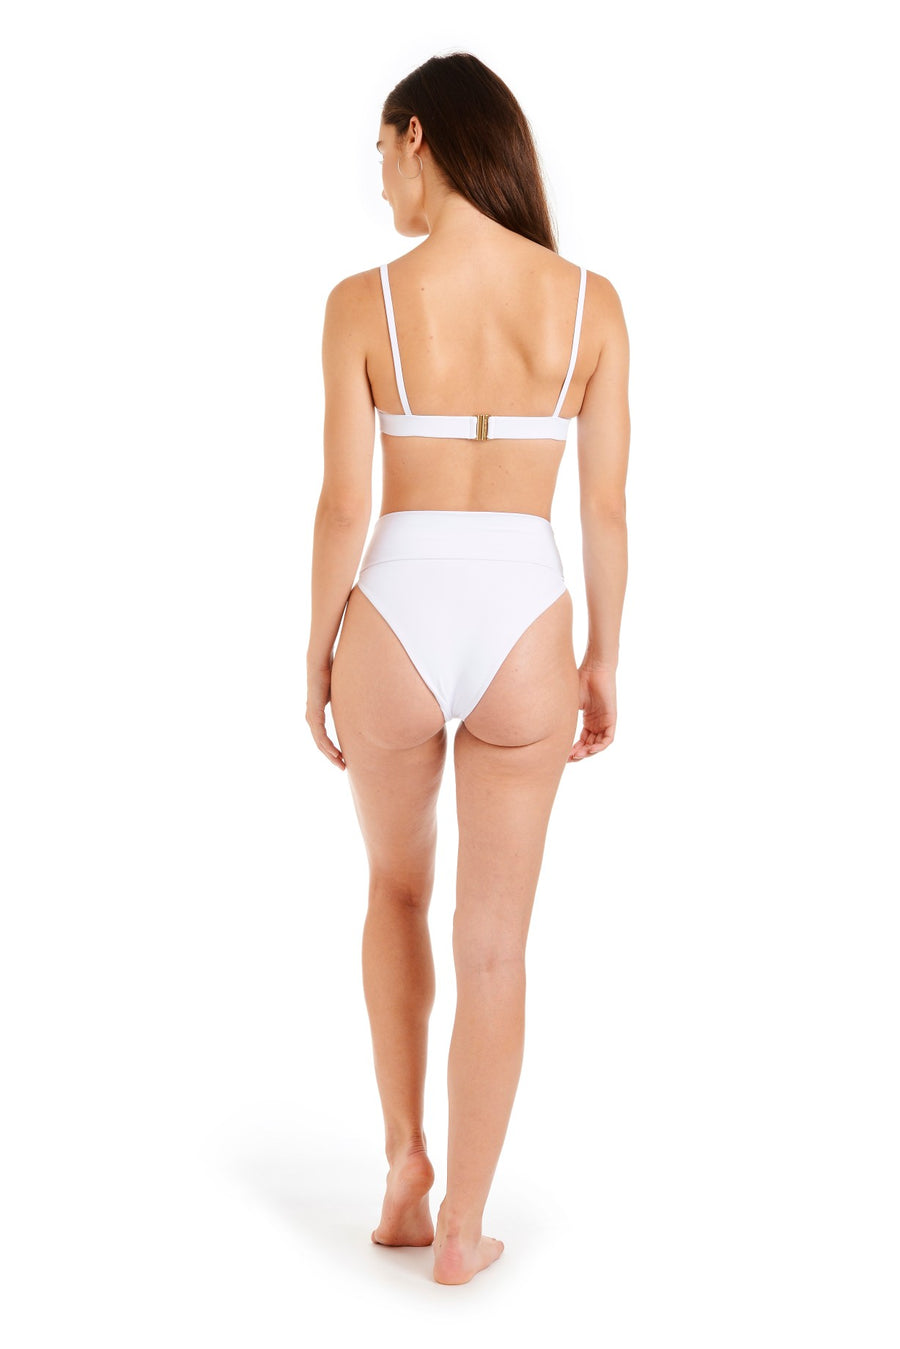 Back view of a woman wearing white swimsuit bottoms